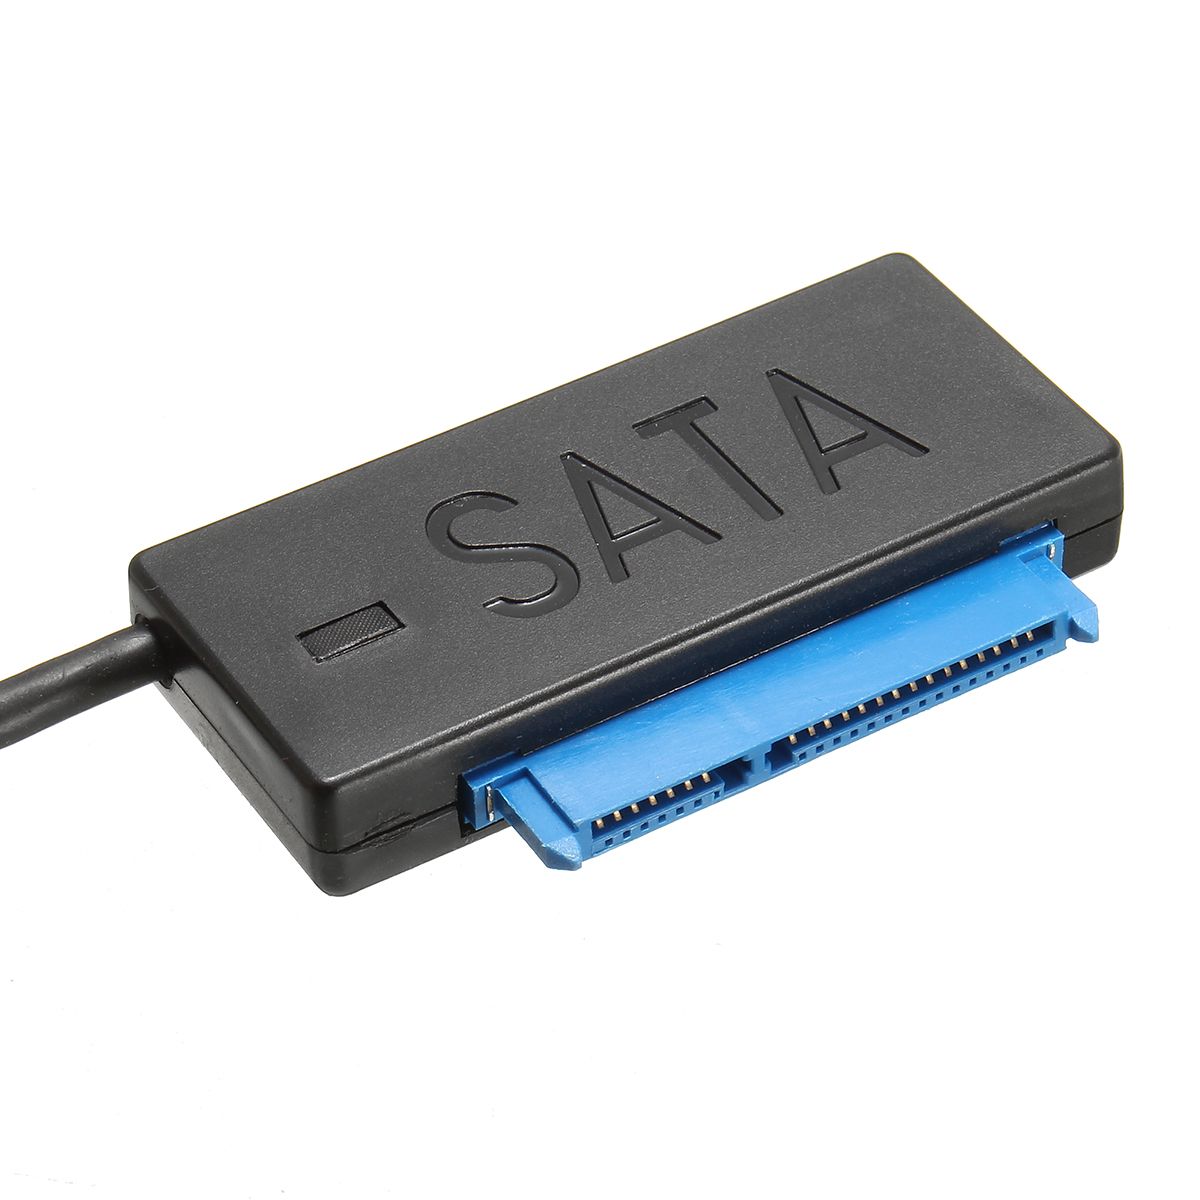 USB-30-to-SATA-Adapter-Cable-for-25quot-SSDHDD-Drives-SATA-to-USB-30-External-Converter-SATA-III-Con-1711603